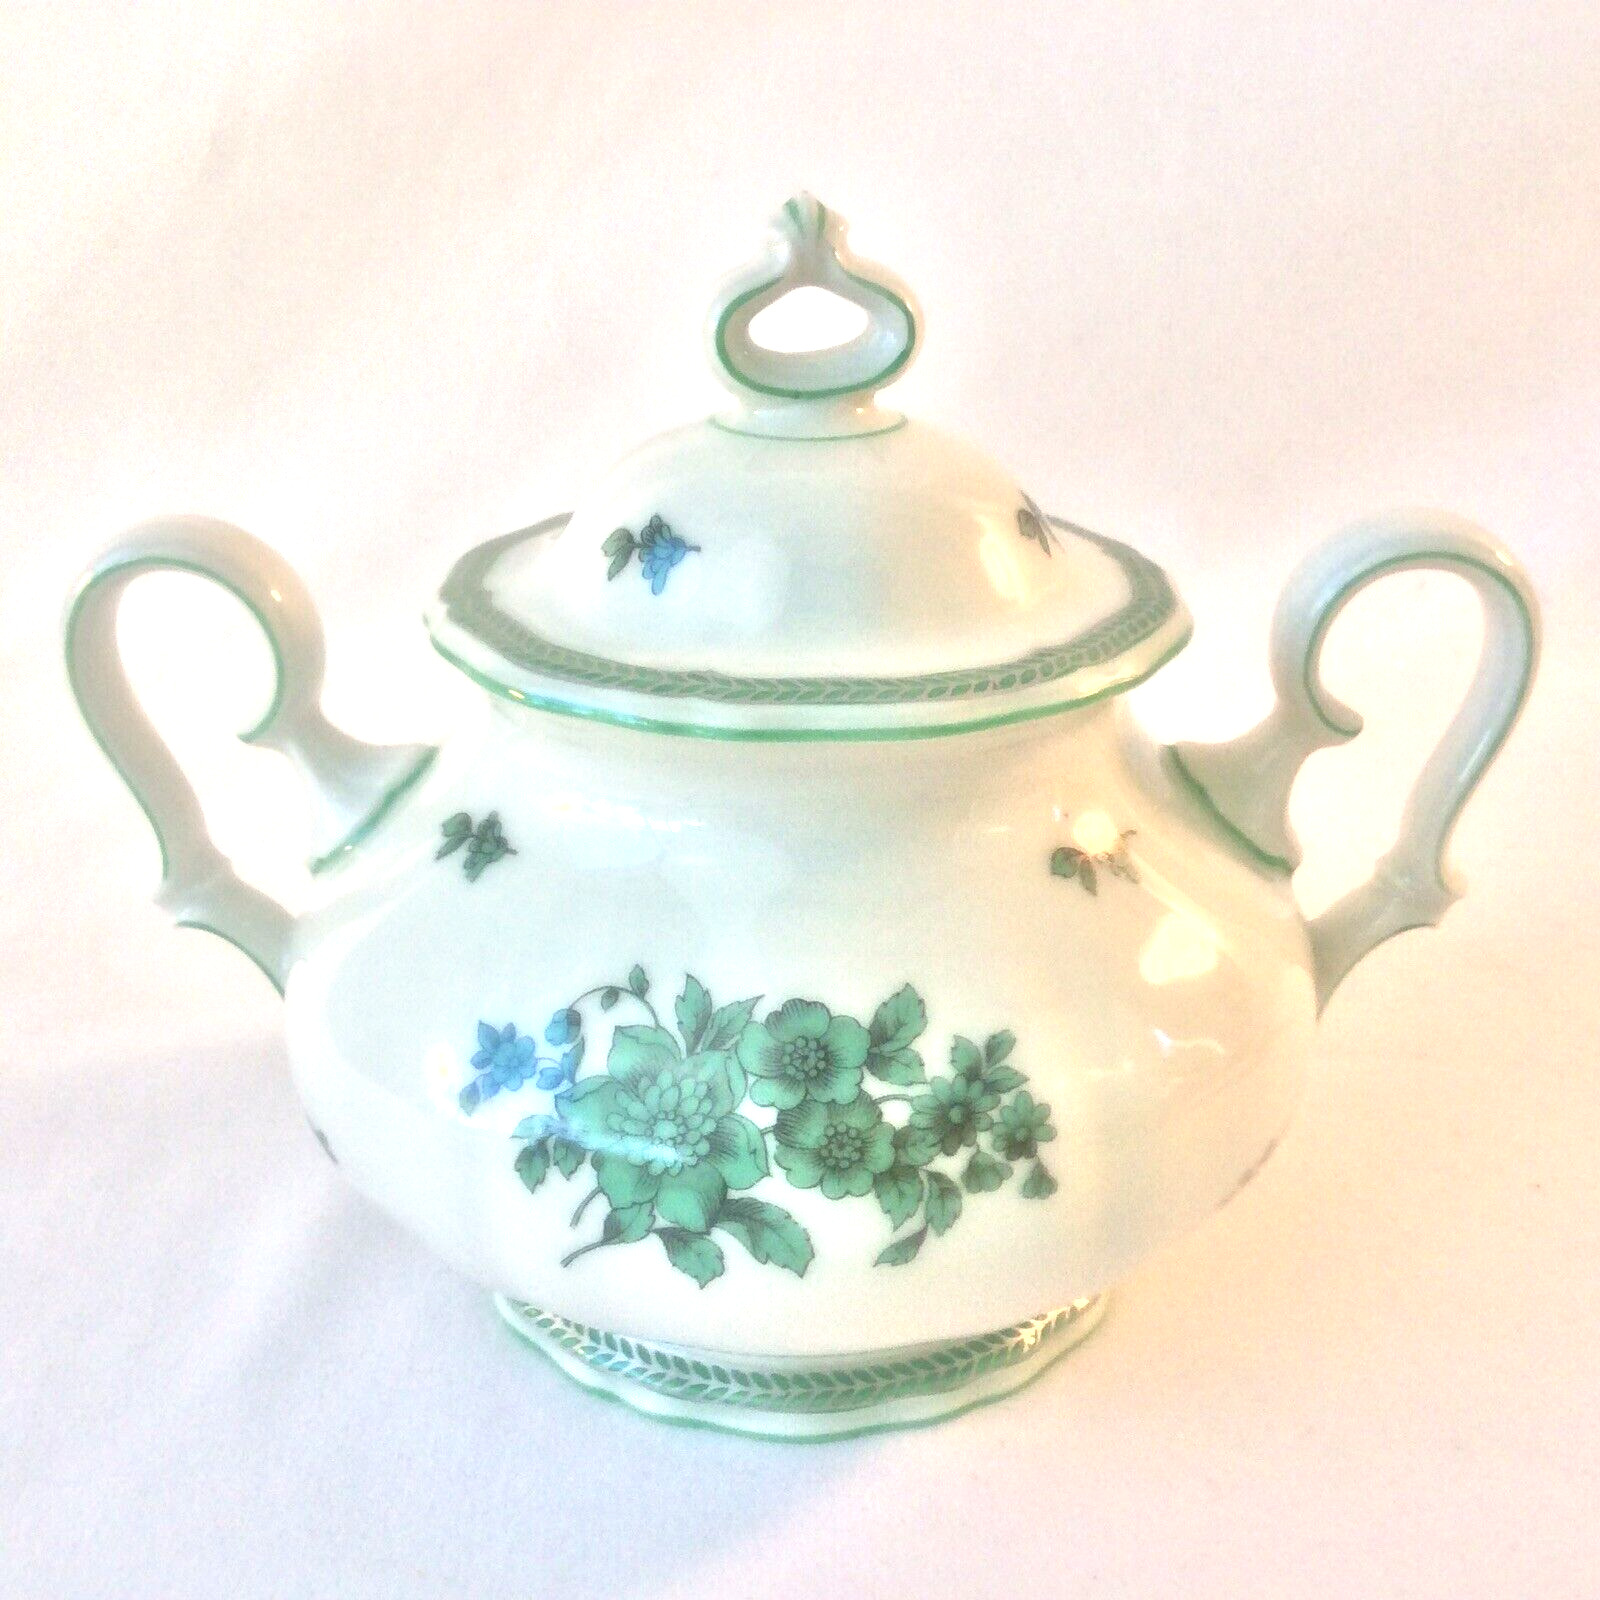 ROSENTHAL CHIPPENDALE GREN BLOOM 1 SET SUGAR BOWL w LID 1 AVAIL WWII XLNT 1 SOLD